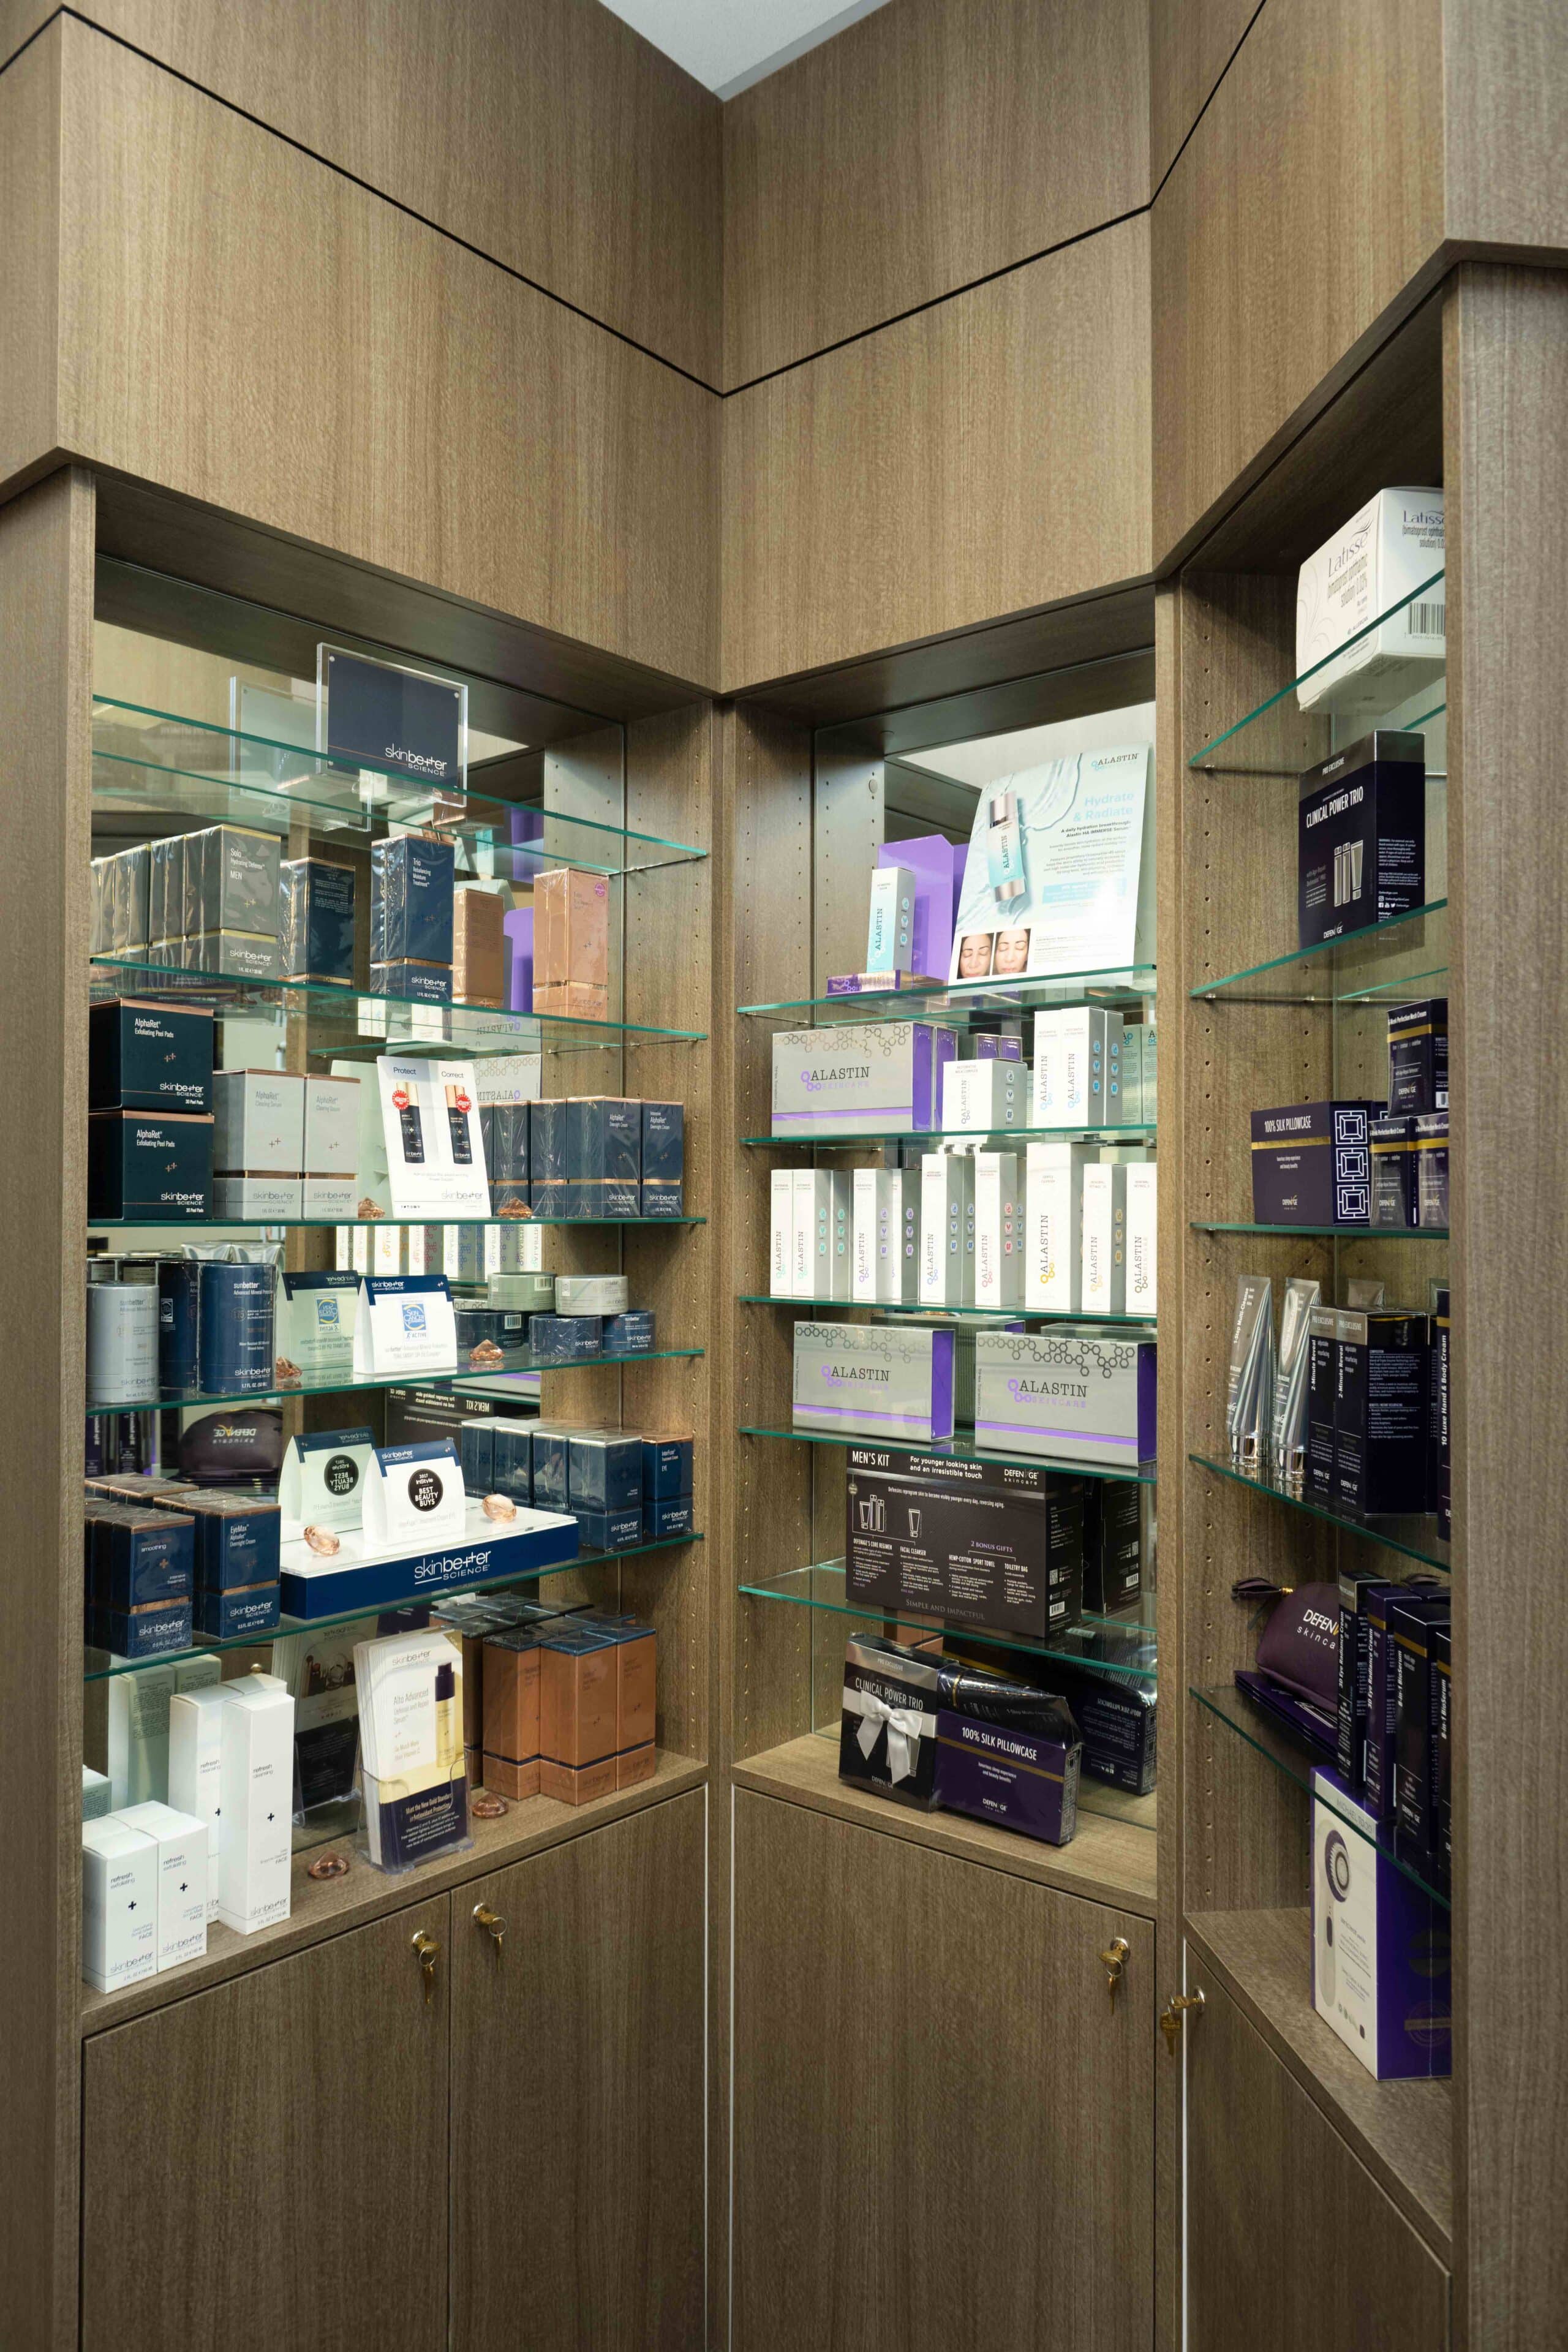 Mentor Plastic Surgery and MedSpa product shelves